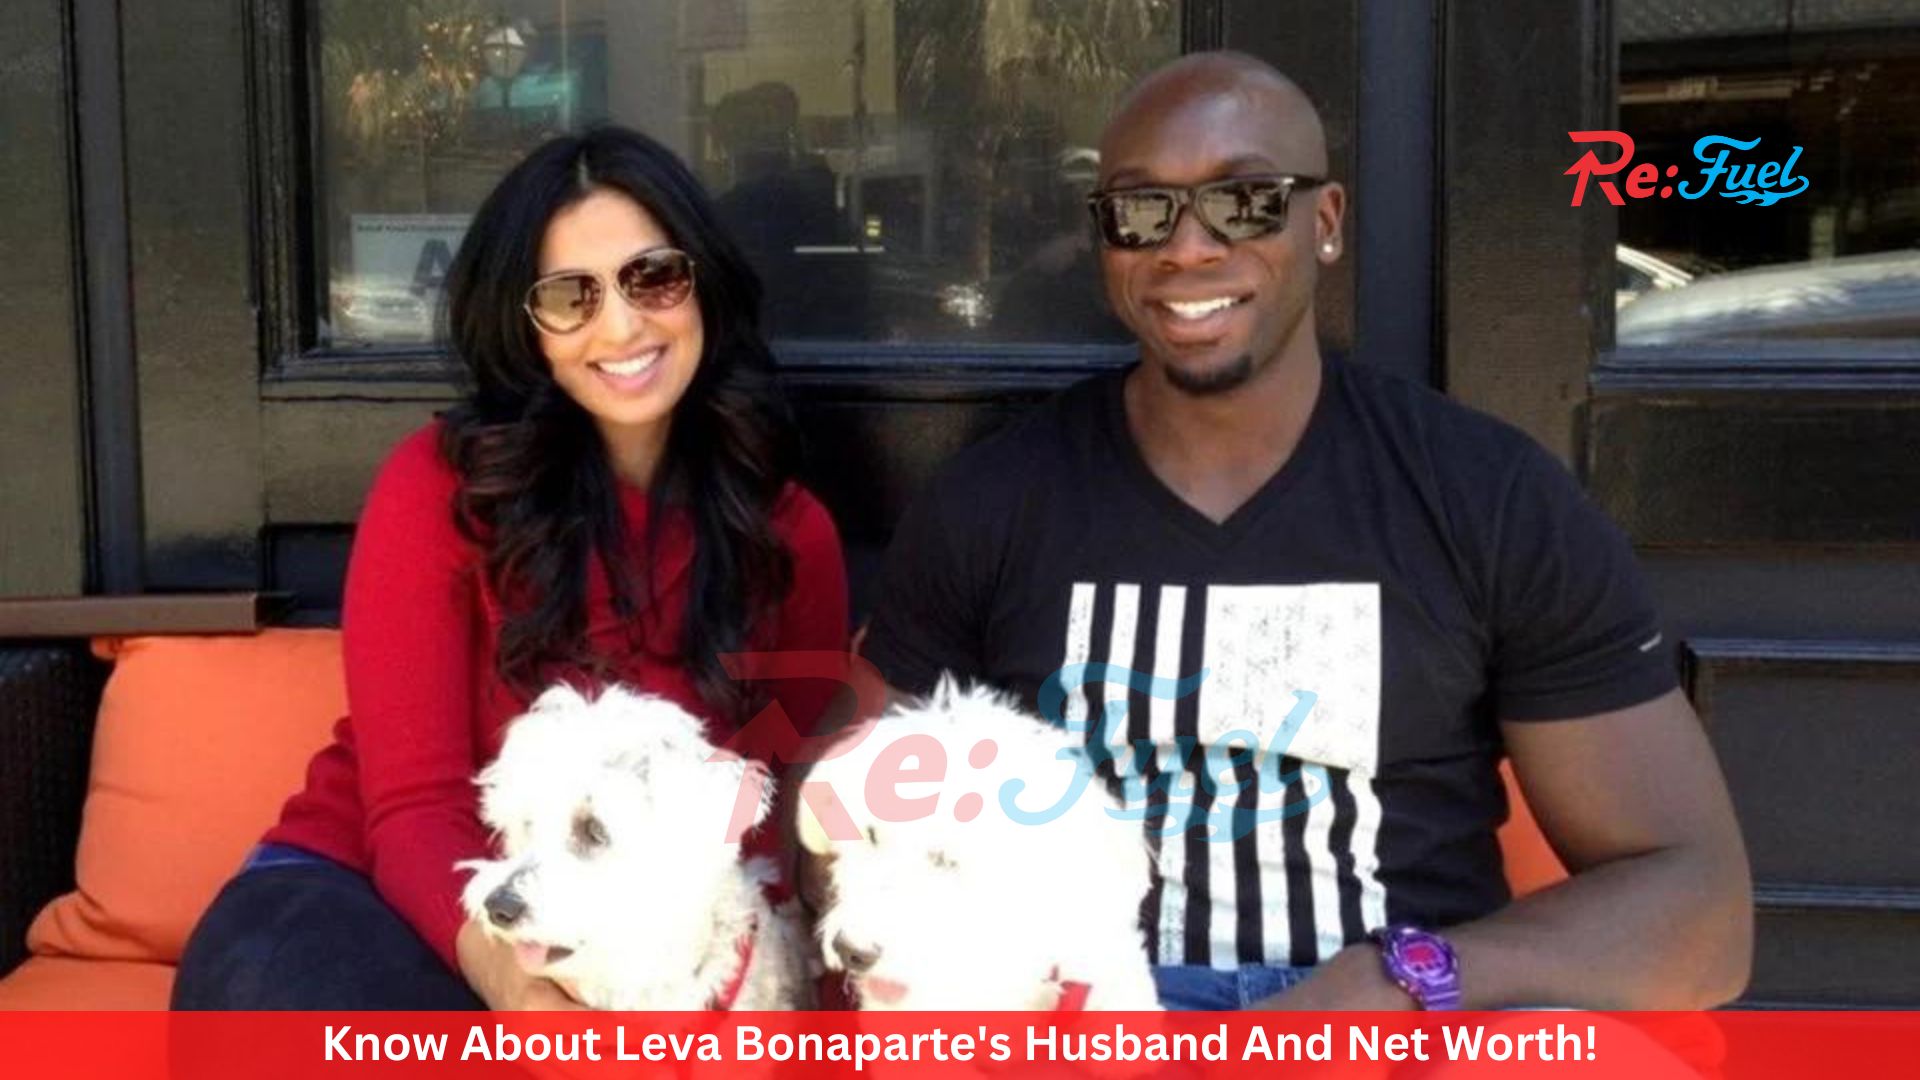 Know About Leva Bonaparte's Husband And Net Worth!